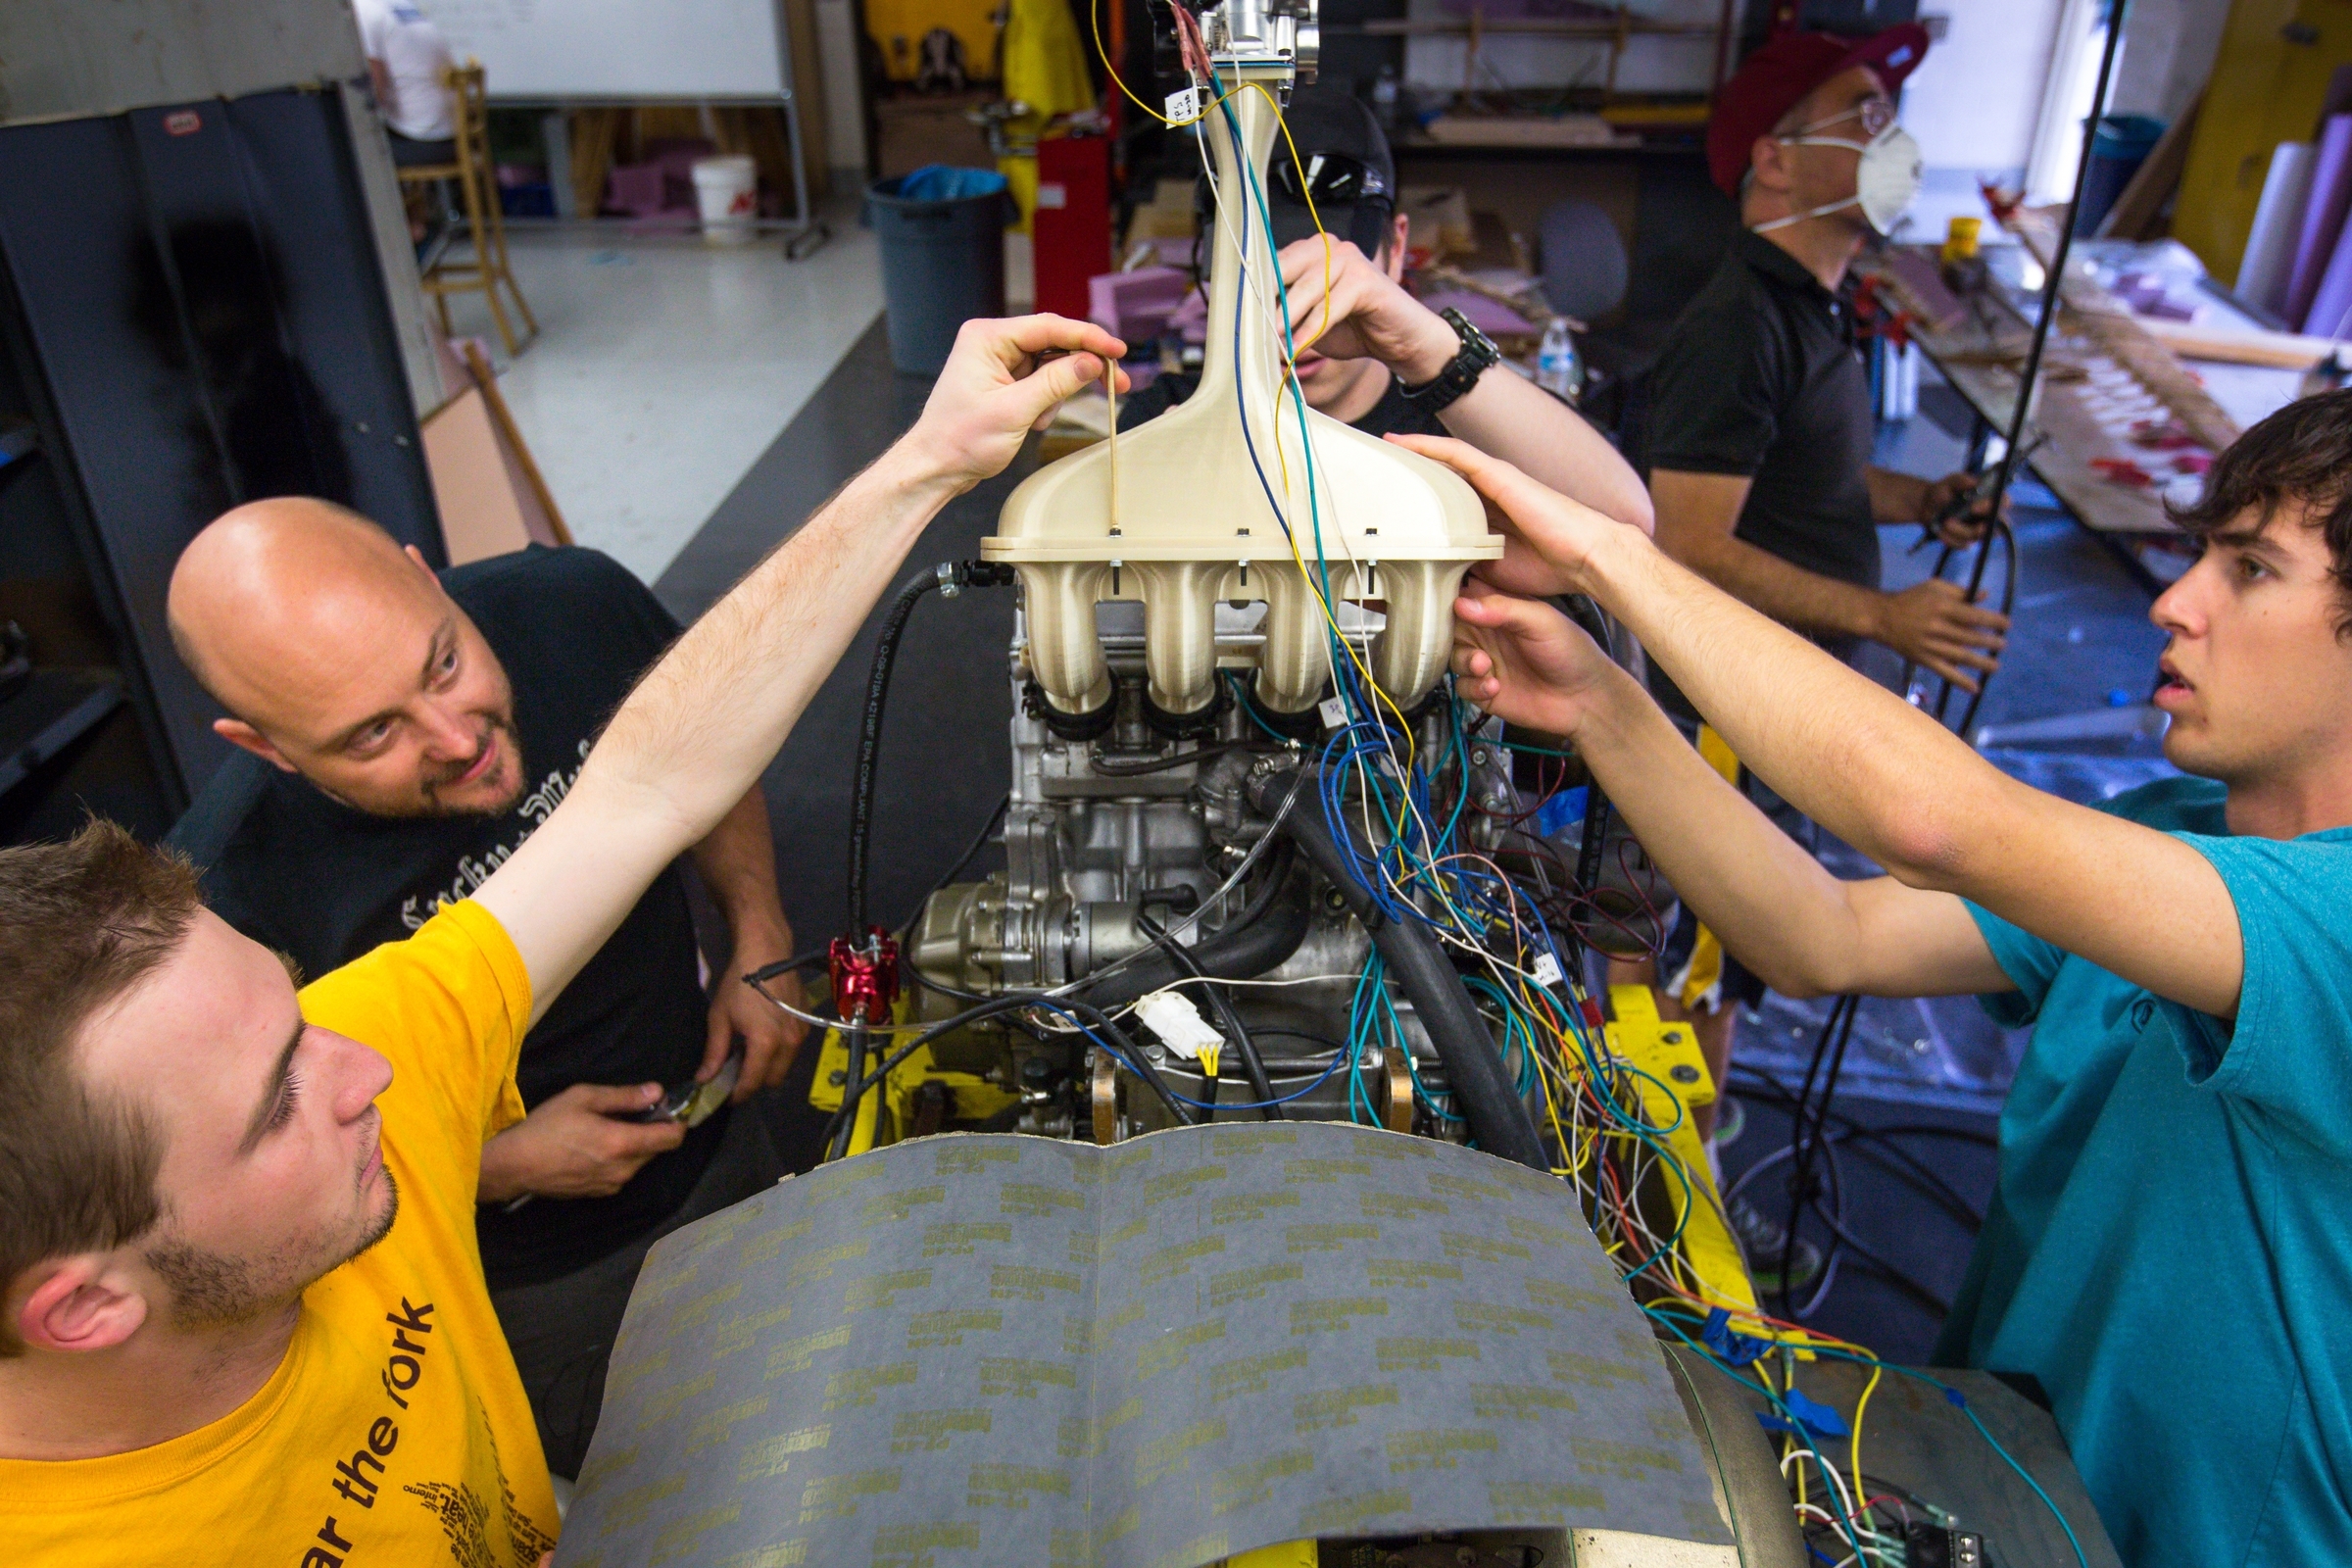 Students work on a throttle in a Formula-style race car.